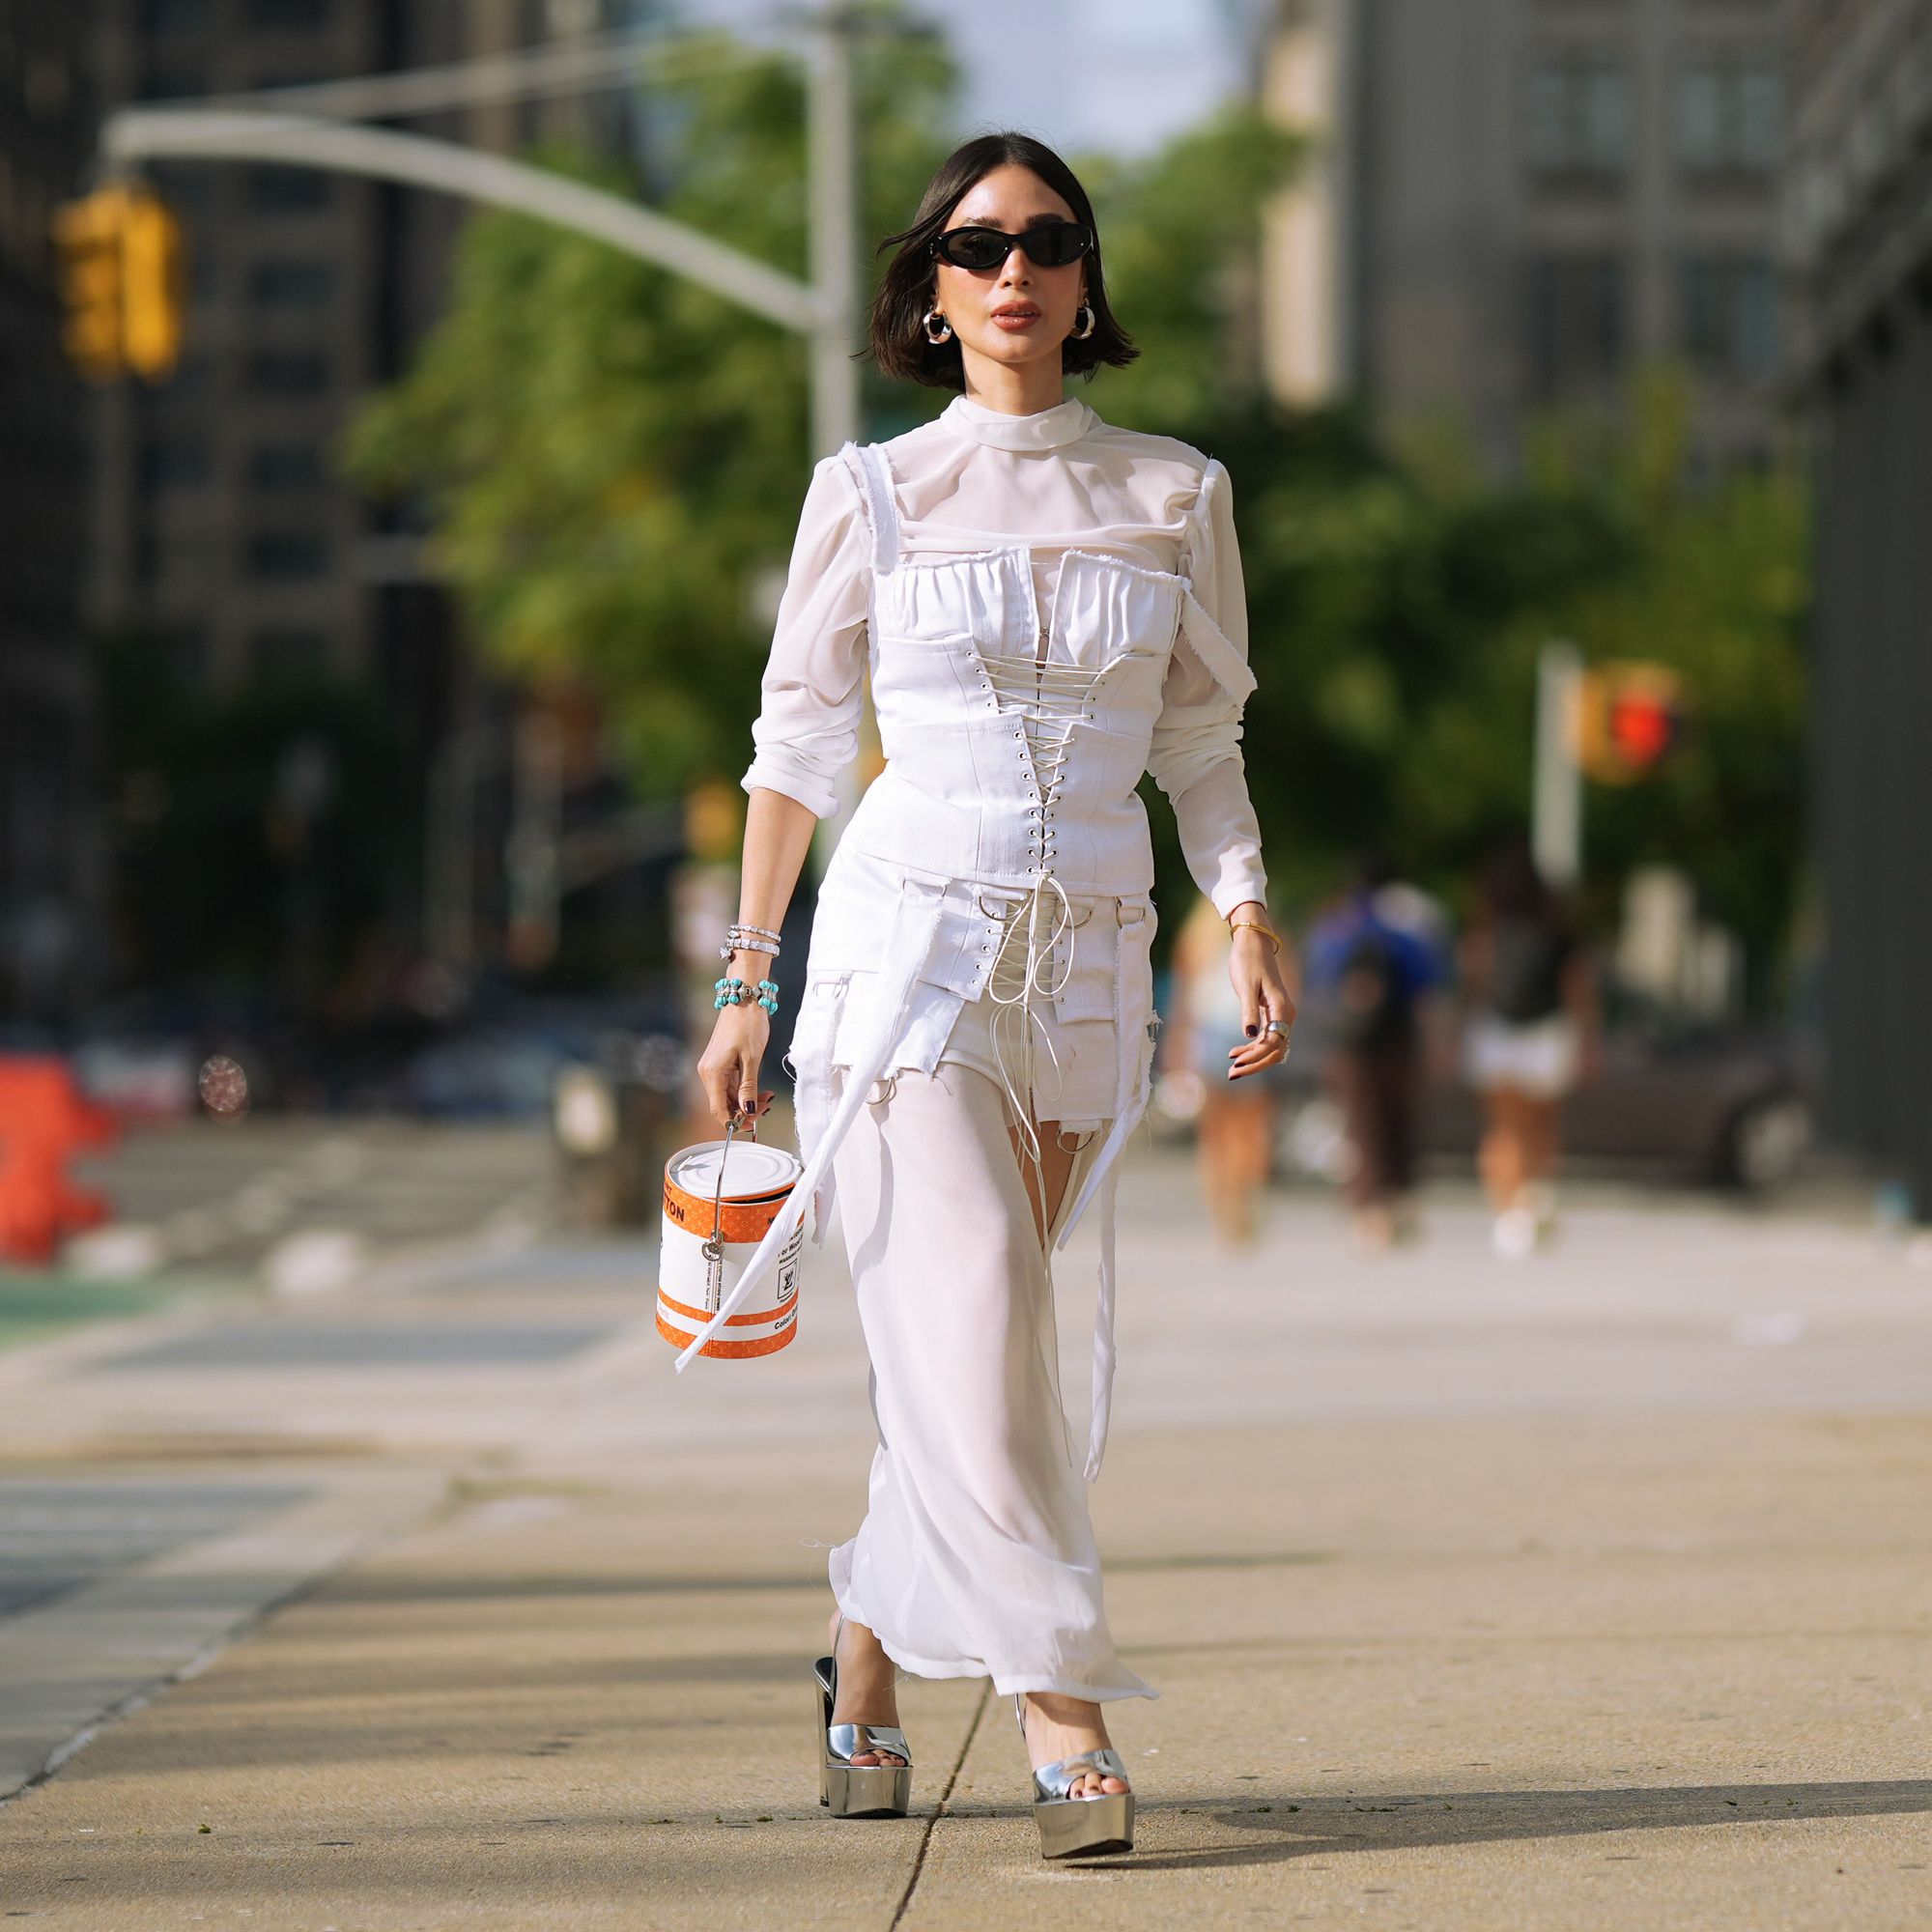 Is wearing white after Labor Day still a fashion faux pas?